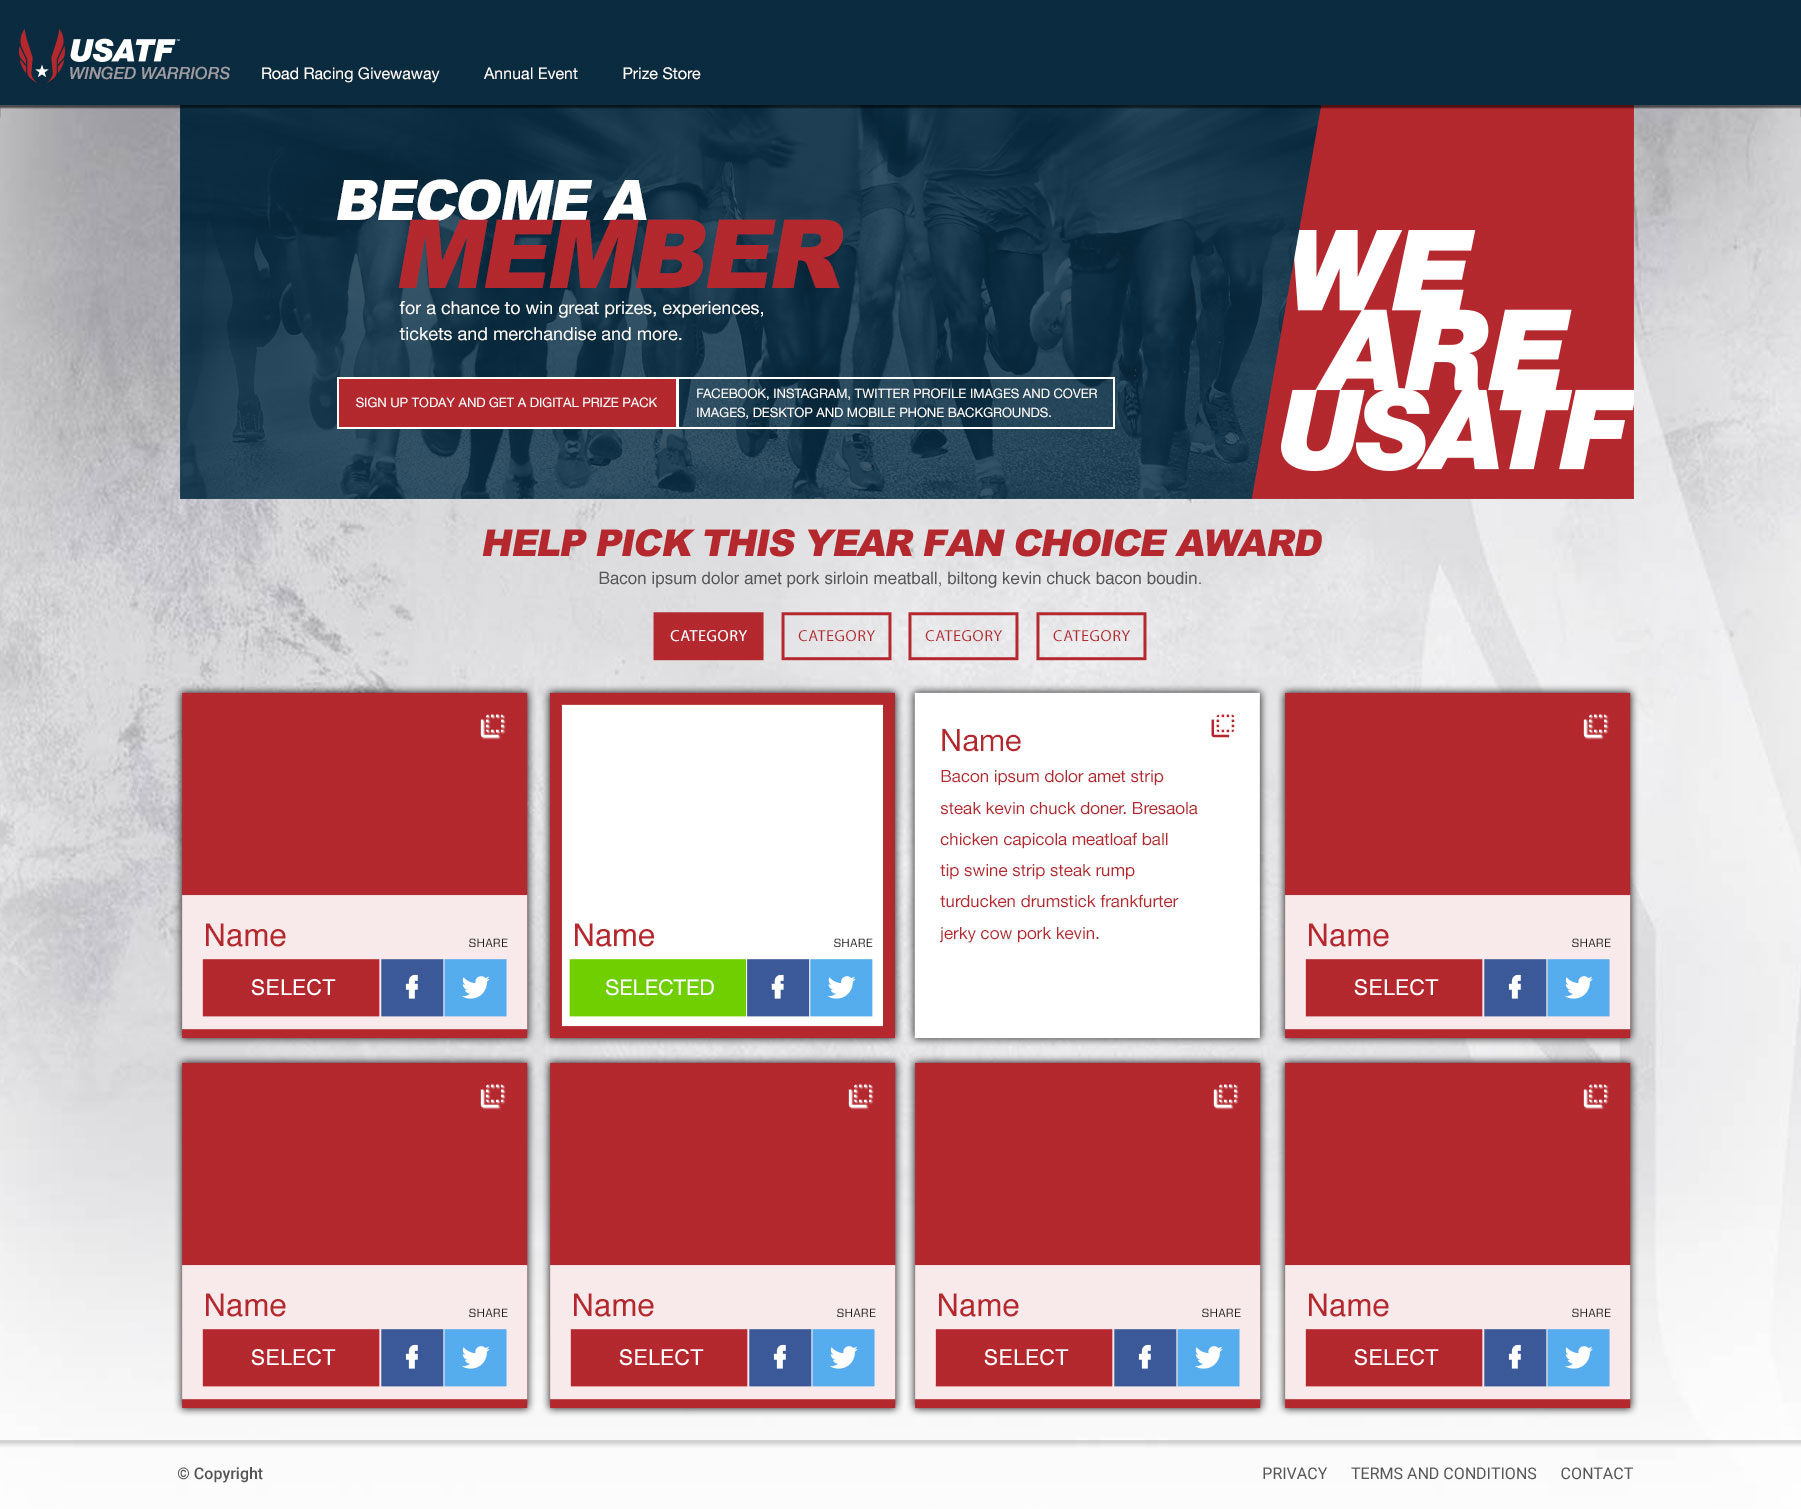 USATF_Engage_1a-3